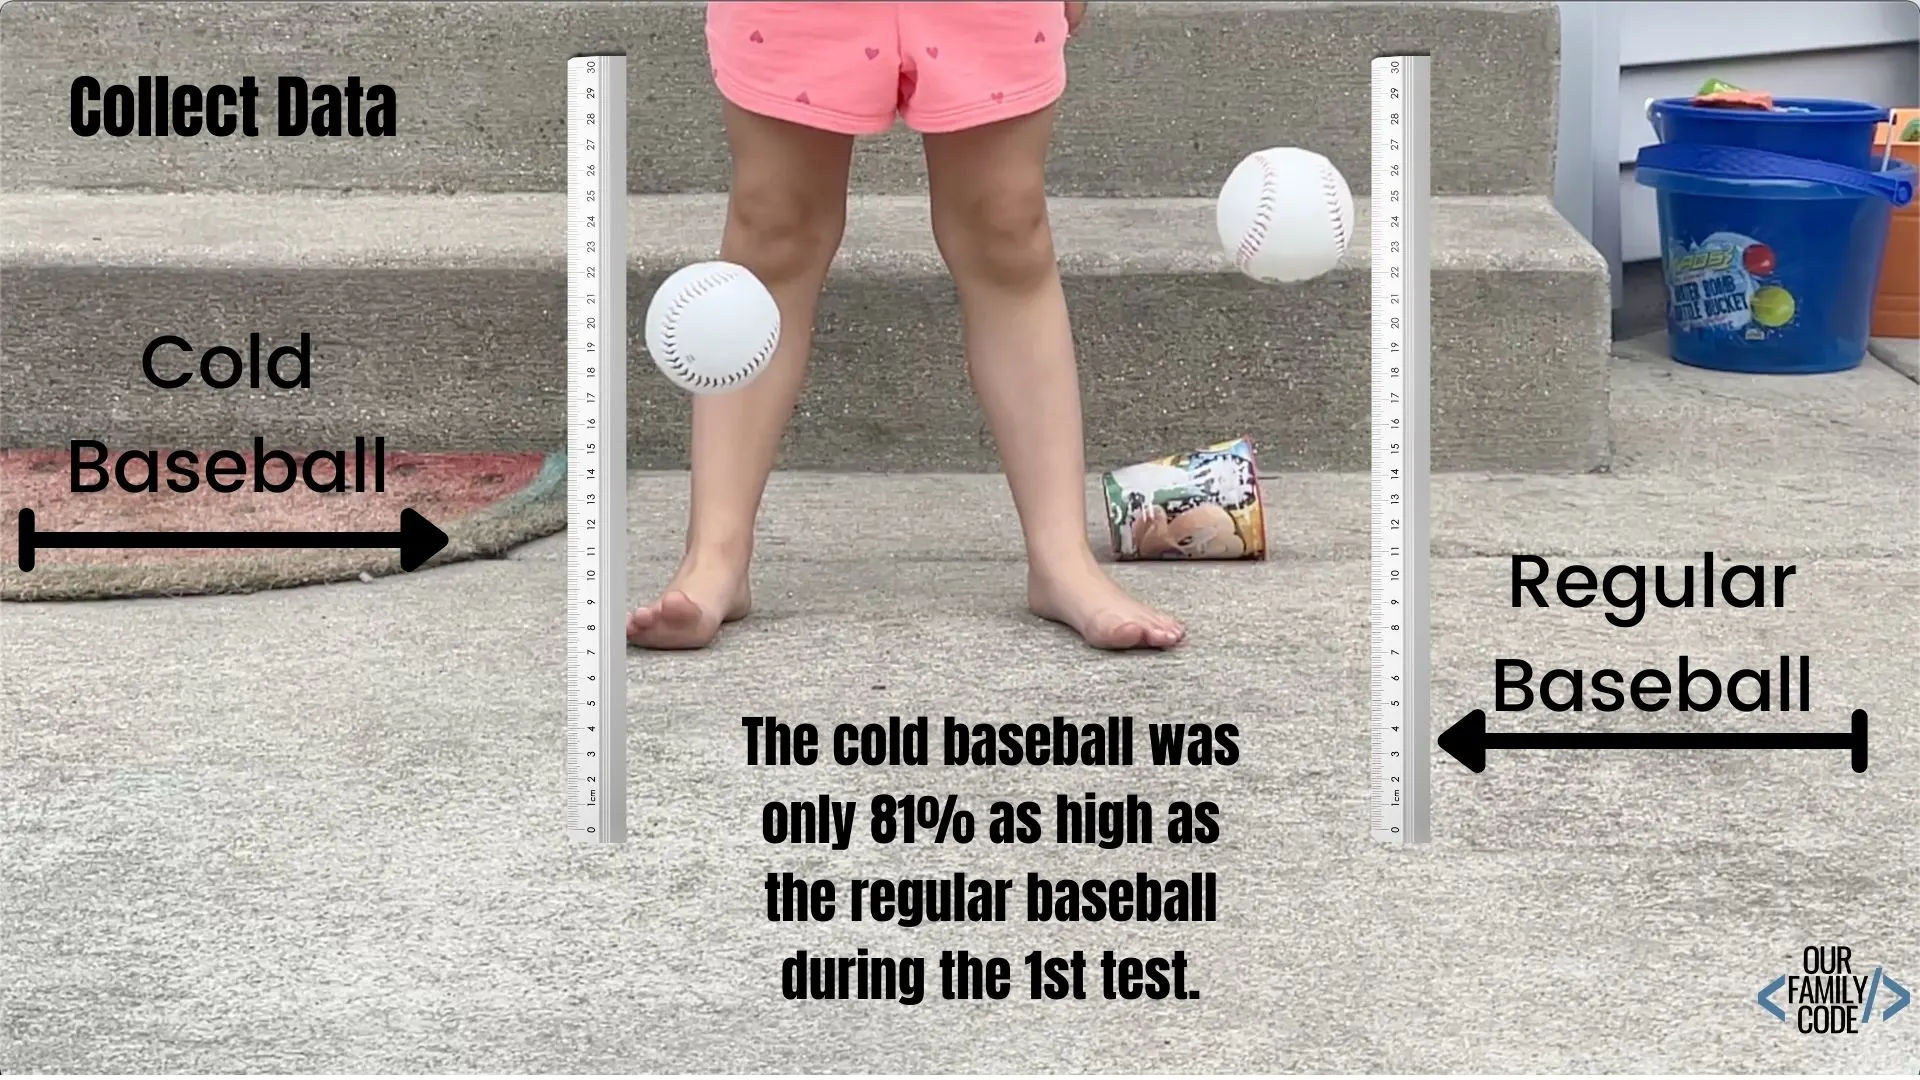 A picture of a frozen baseball science experiment test results for 1st attempt.